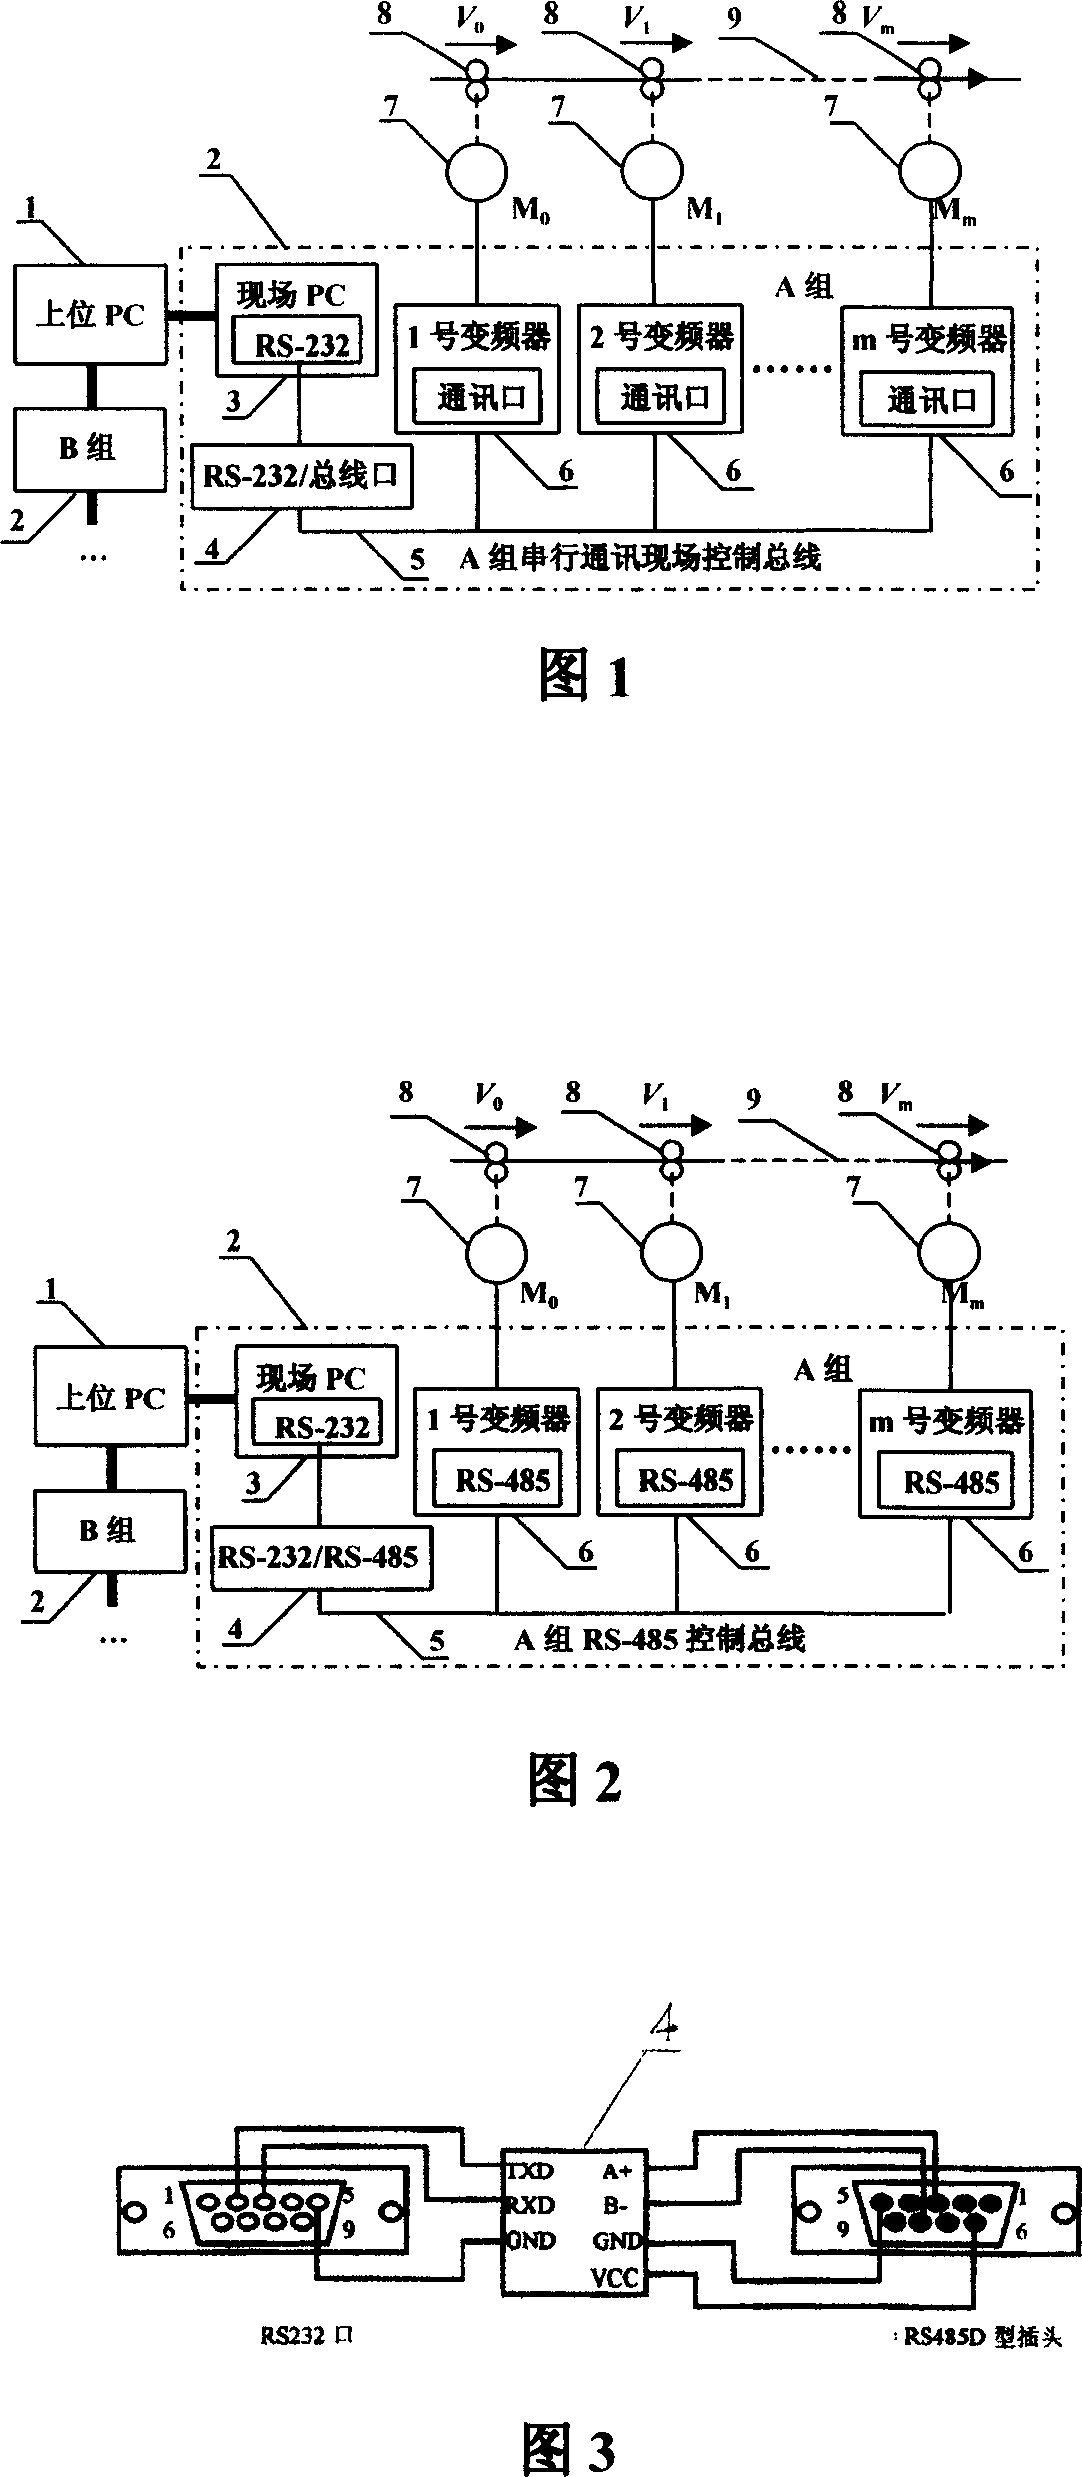 Computer control multiple motor variable frequency and speed regulating synchronous method and its central and distributing control system